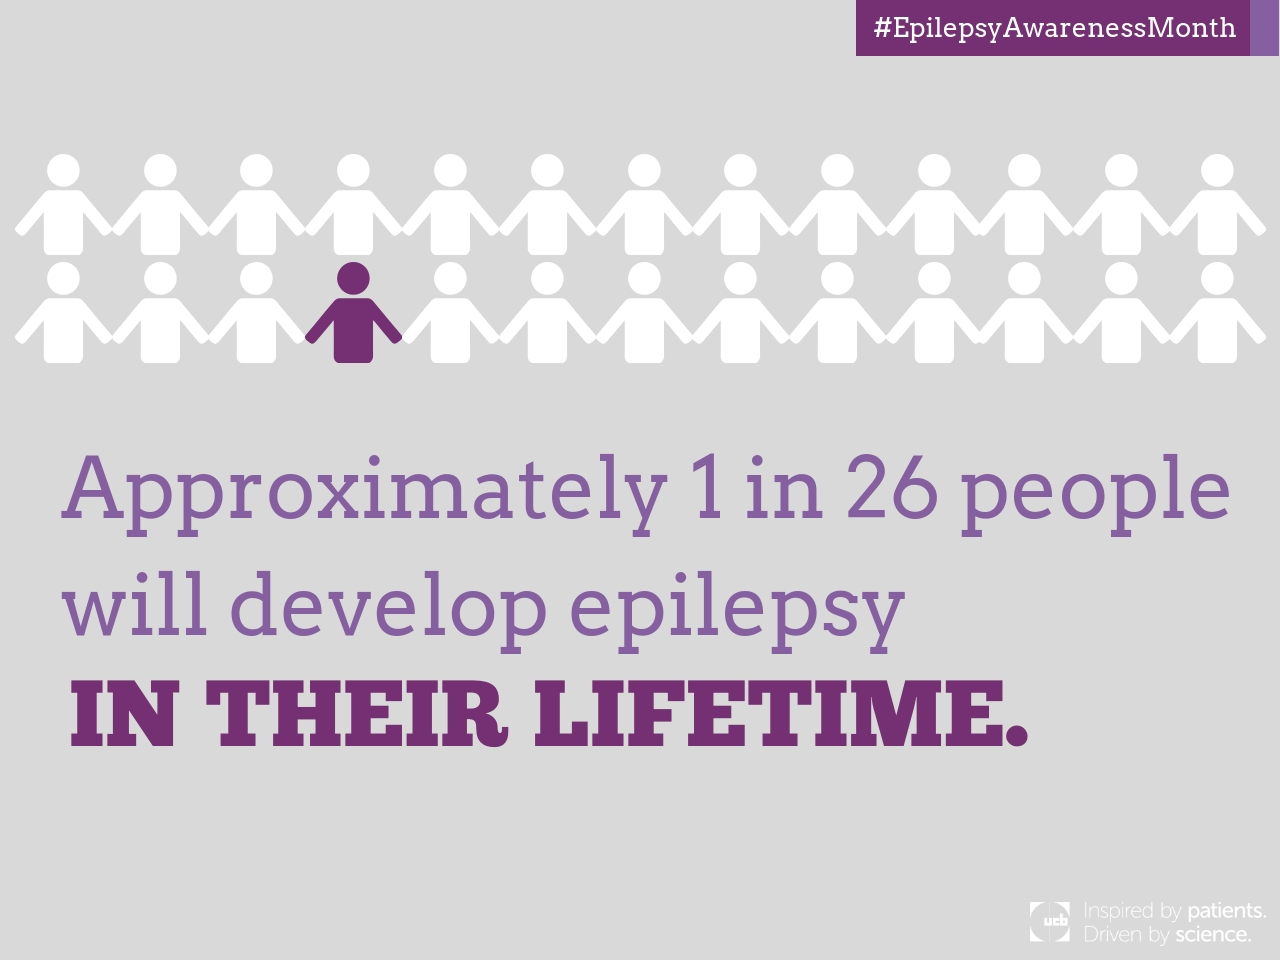 1_in_26_Epilepsy_Awareness_Month_1280x960